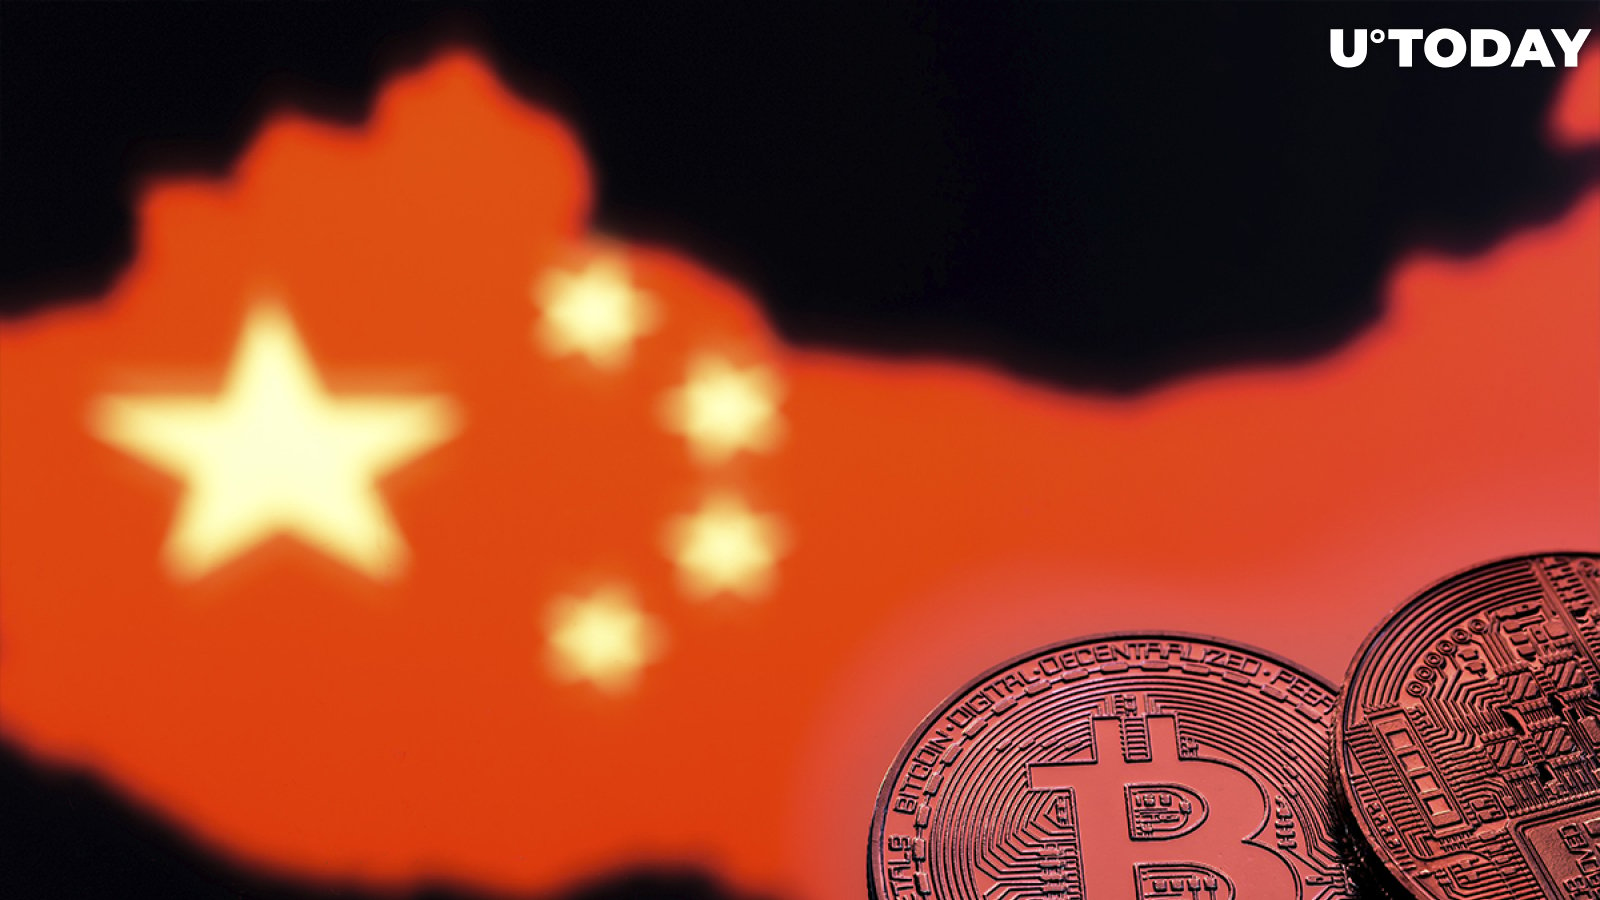 China Is Looking for More Strict Oversight and Restriction for Crypto...Again